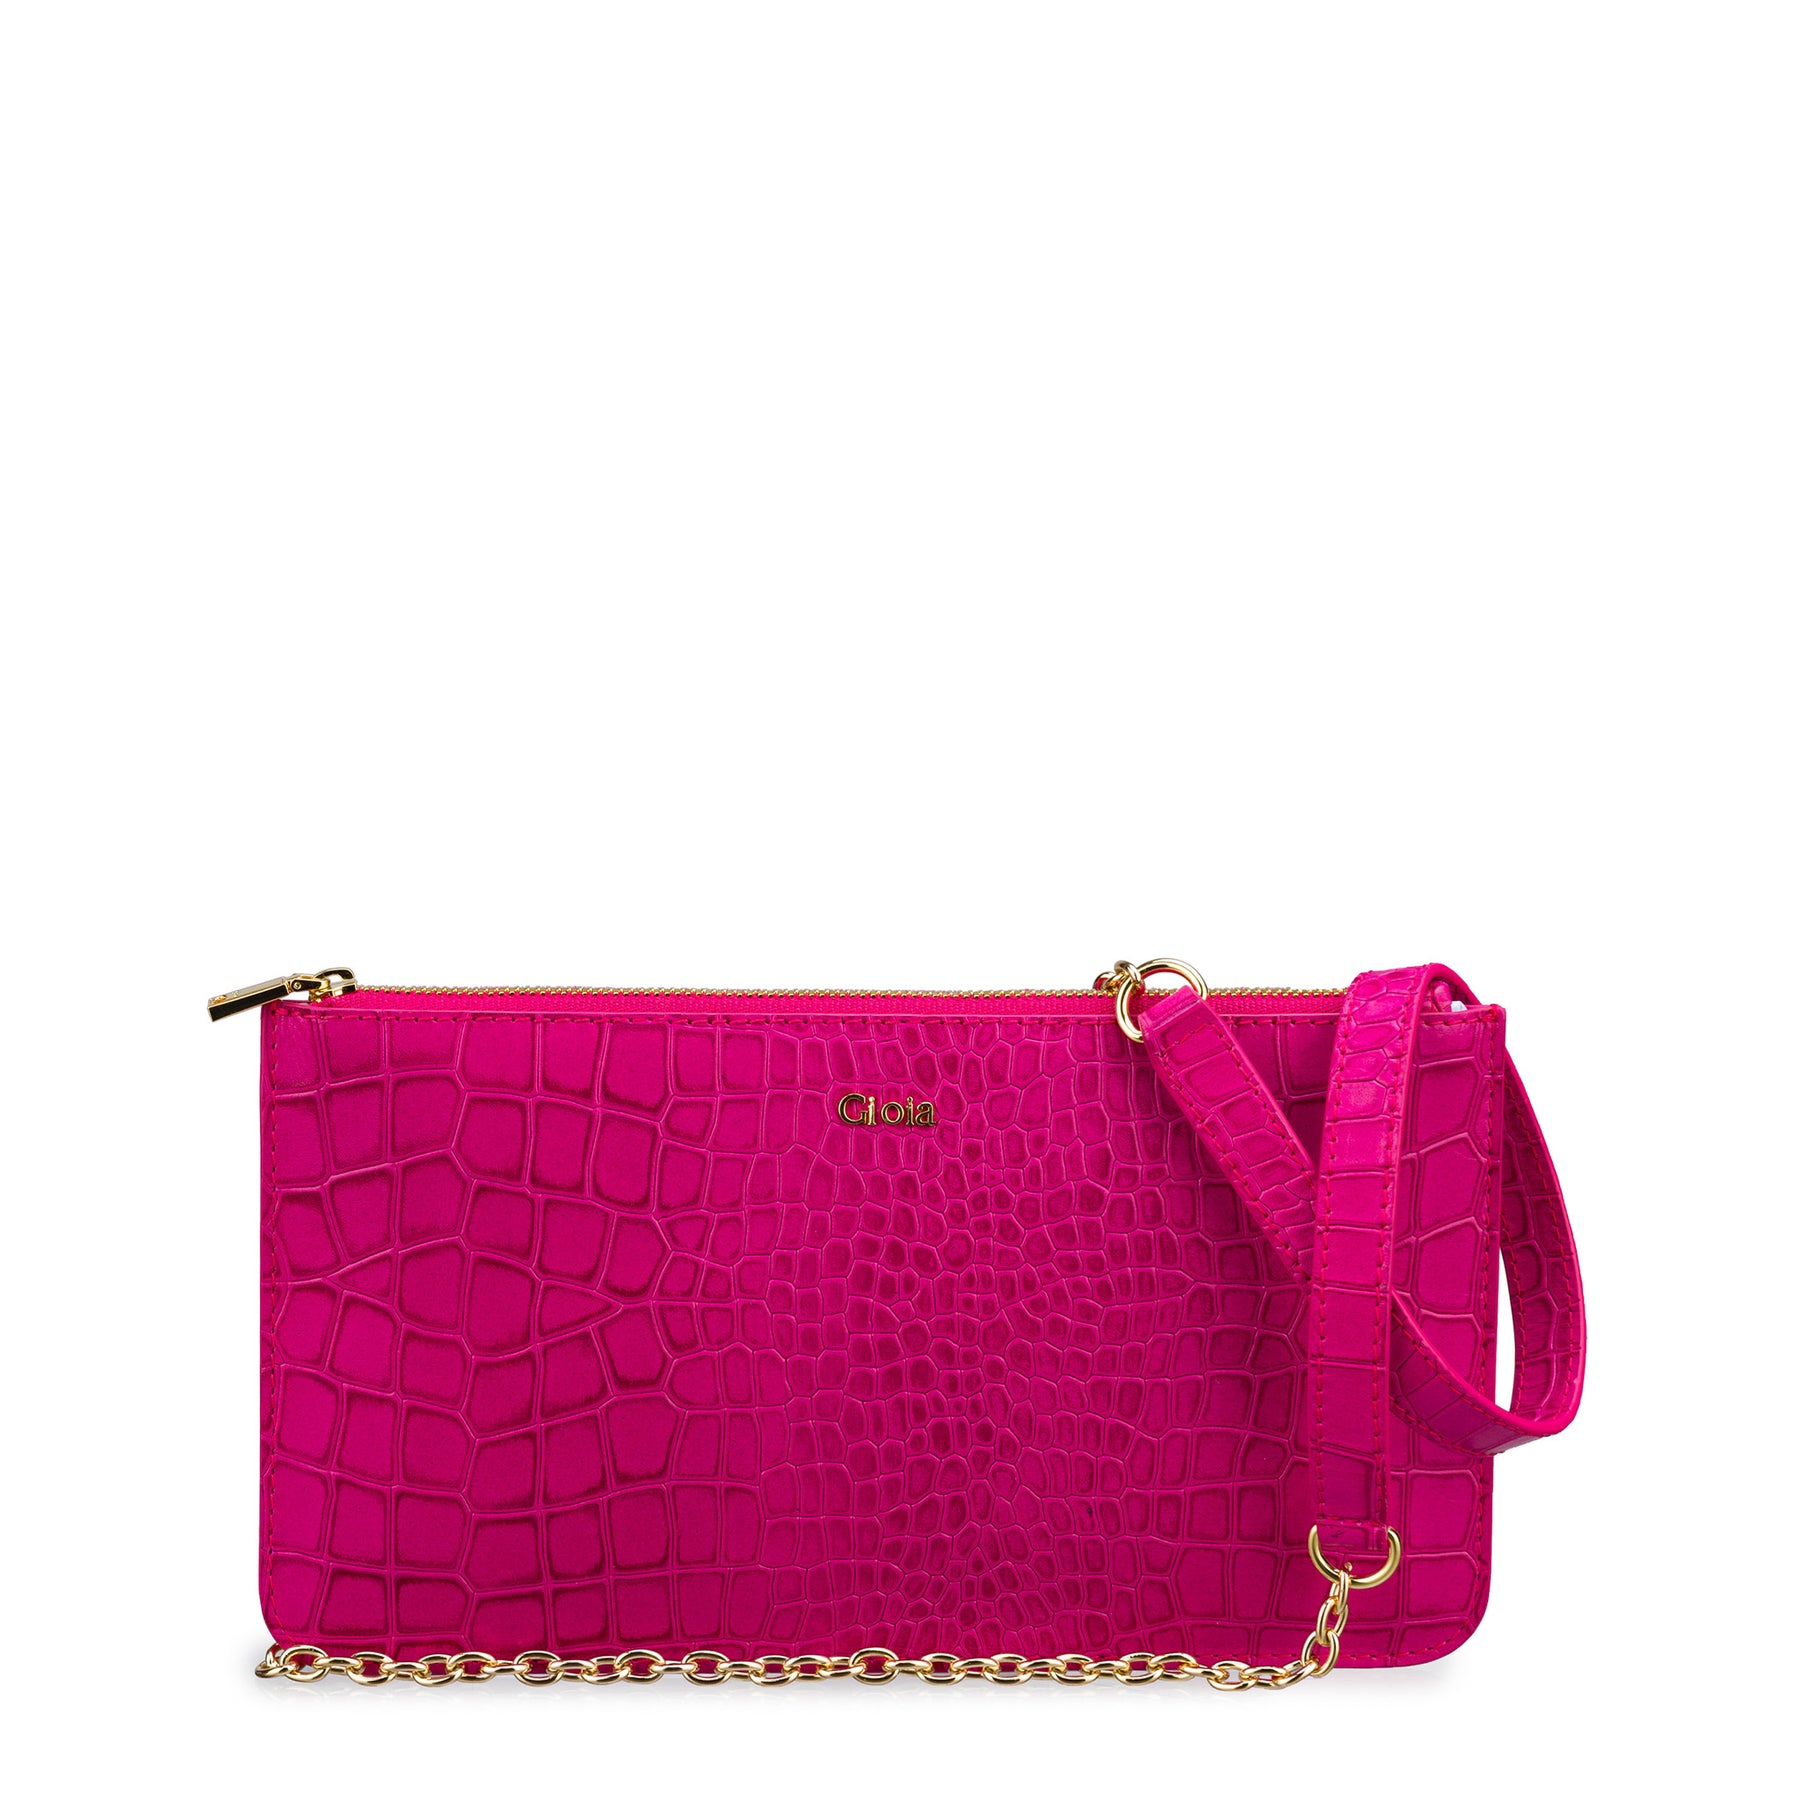 Clutch Bags & Evening Bags for Special Occasions | Accessorize UK